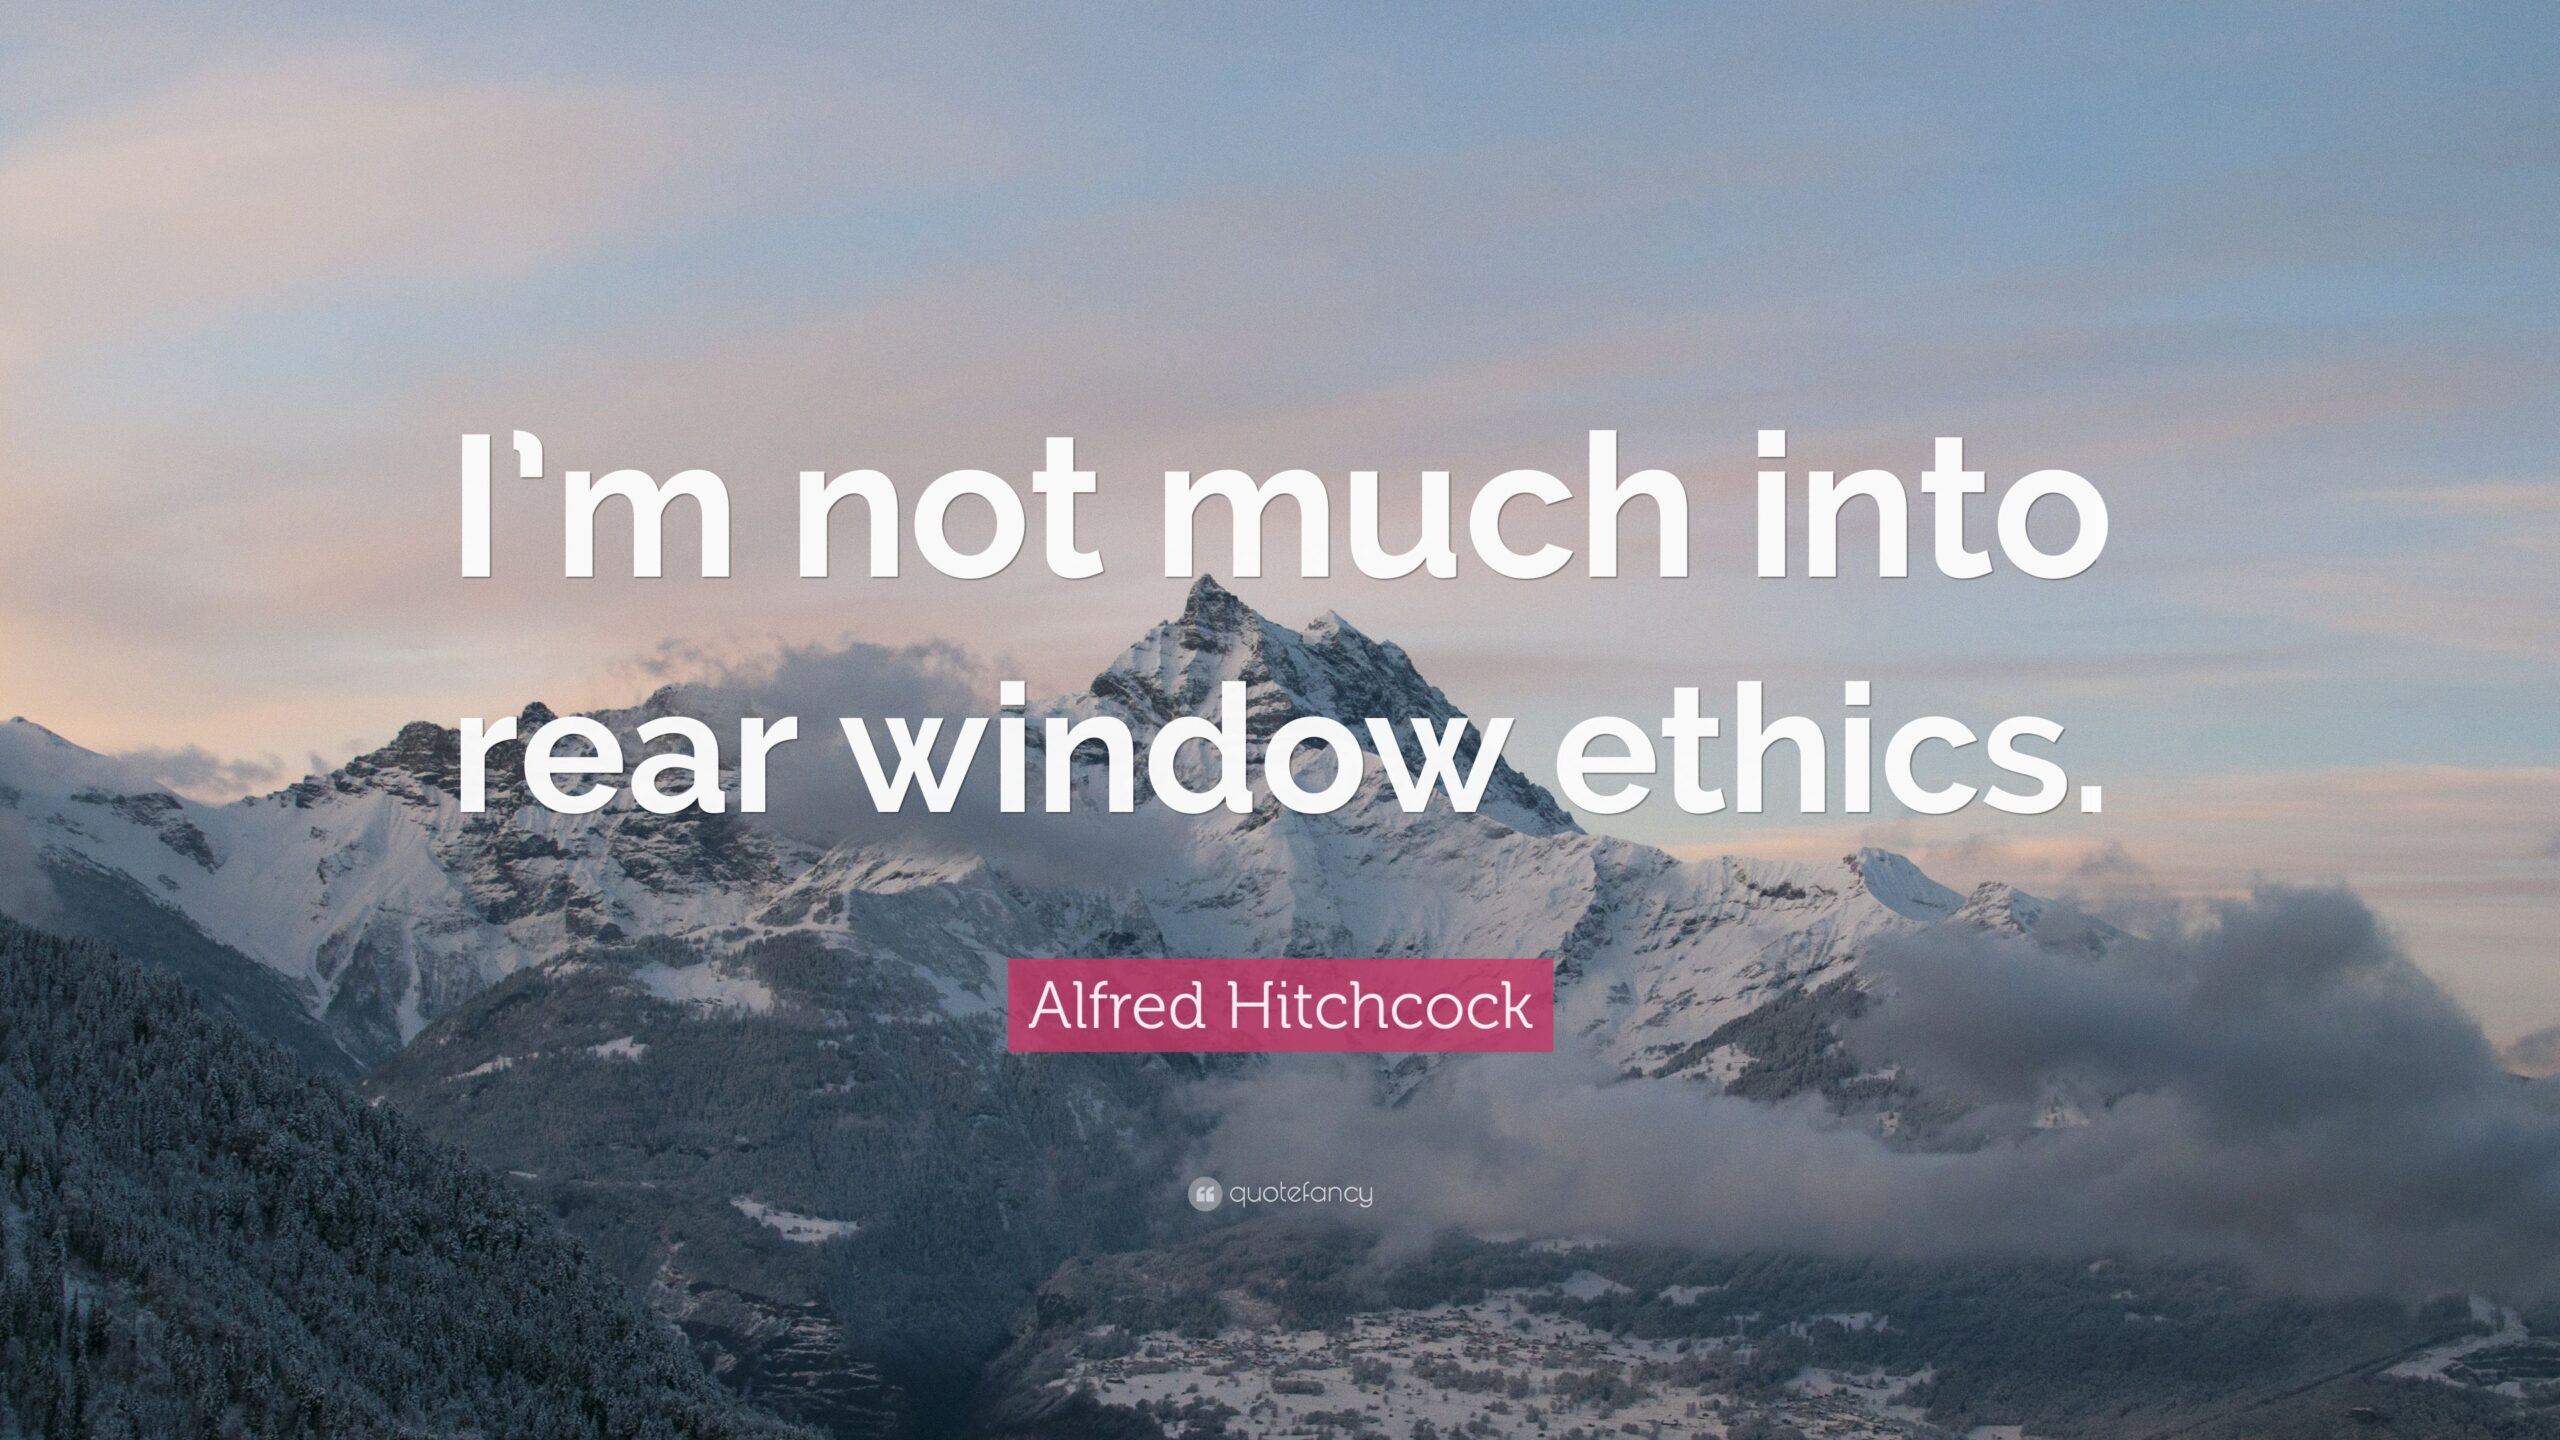 Alfred Hitchcock Quote “I’m not much into rear window ethics”